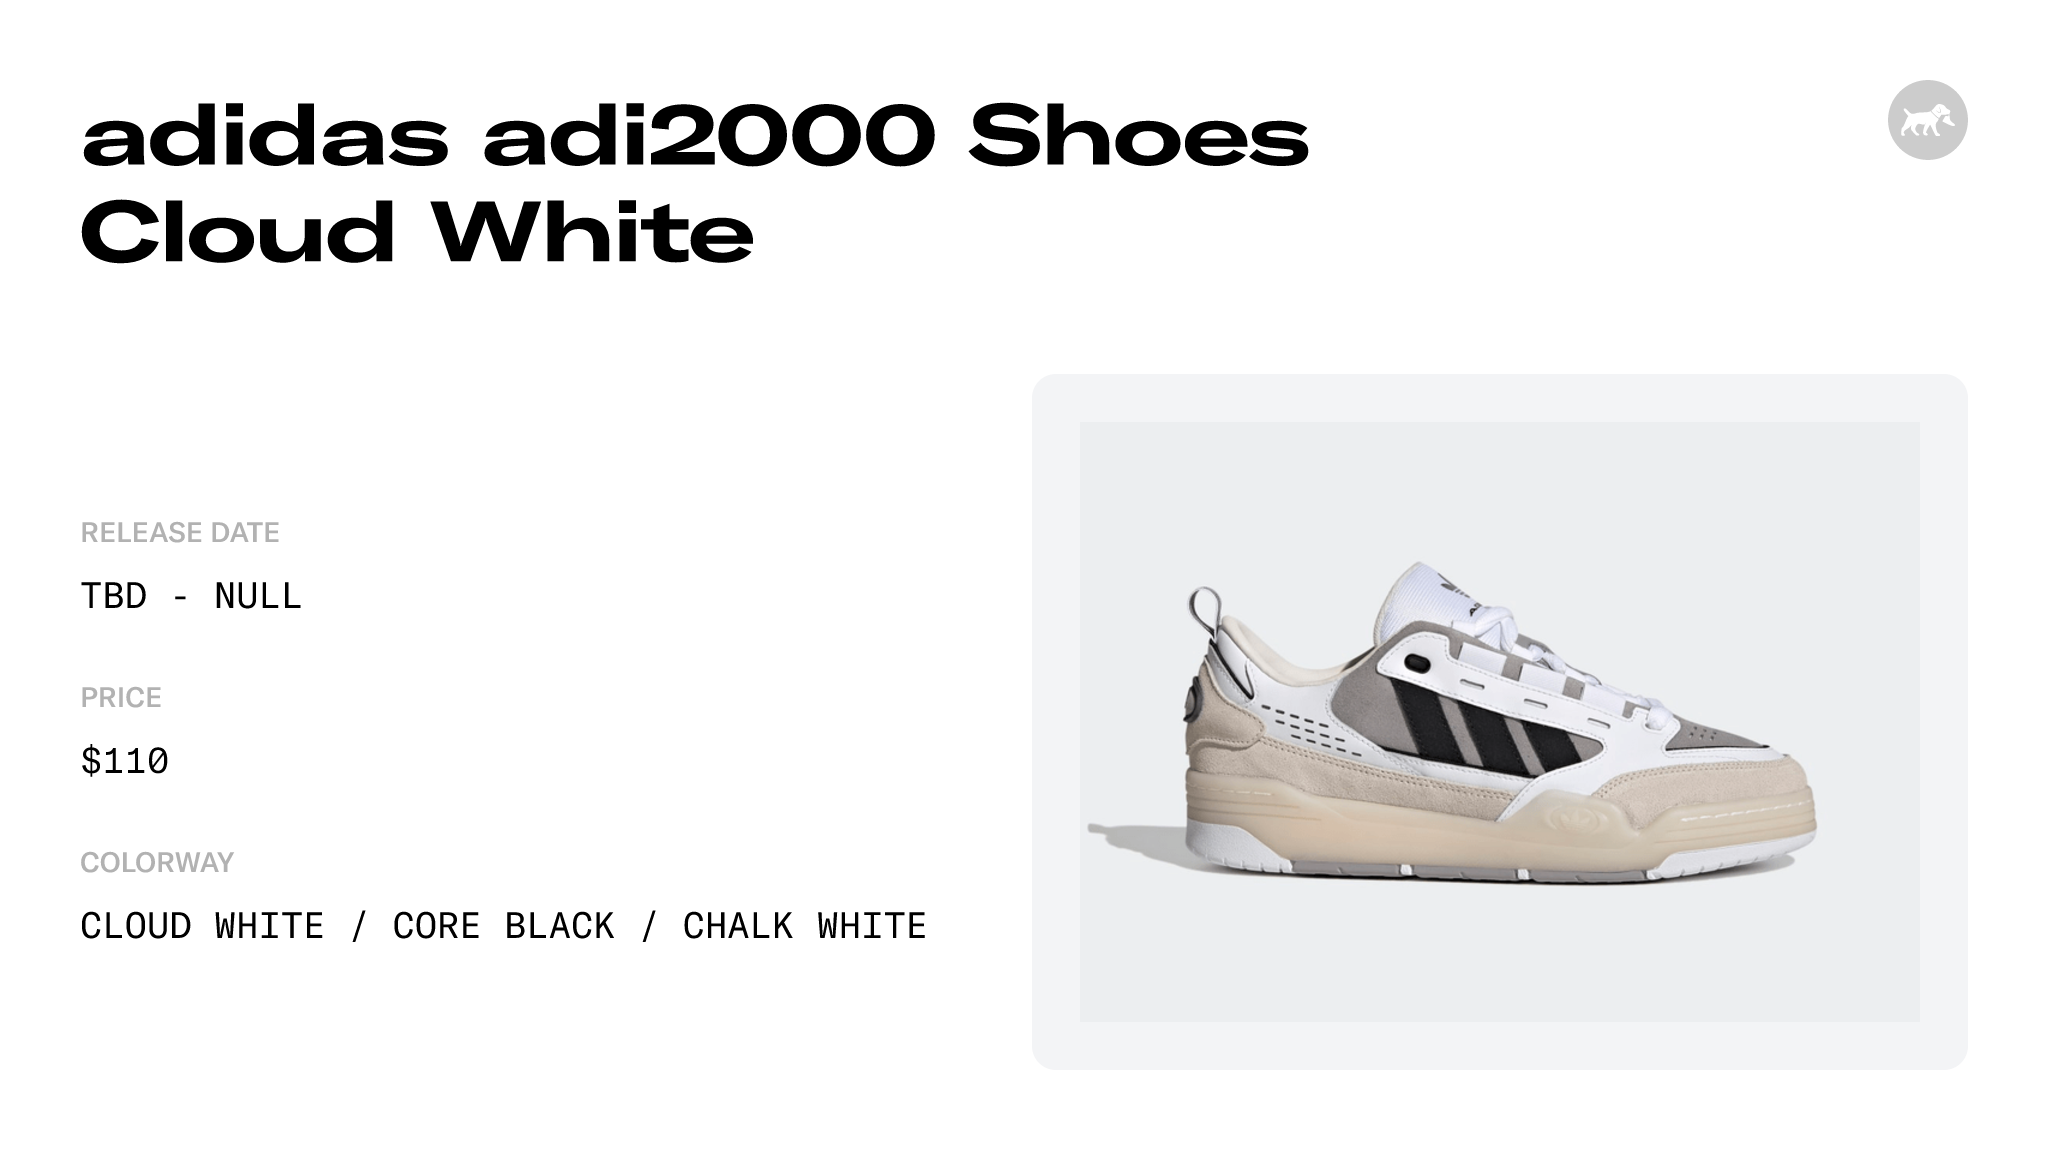 adidas adi2000 Shoes Cloud White - GV9544 Raffles and Release Date